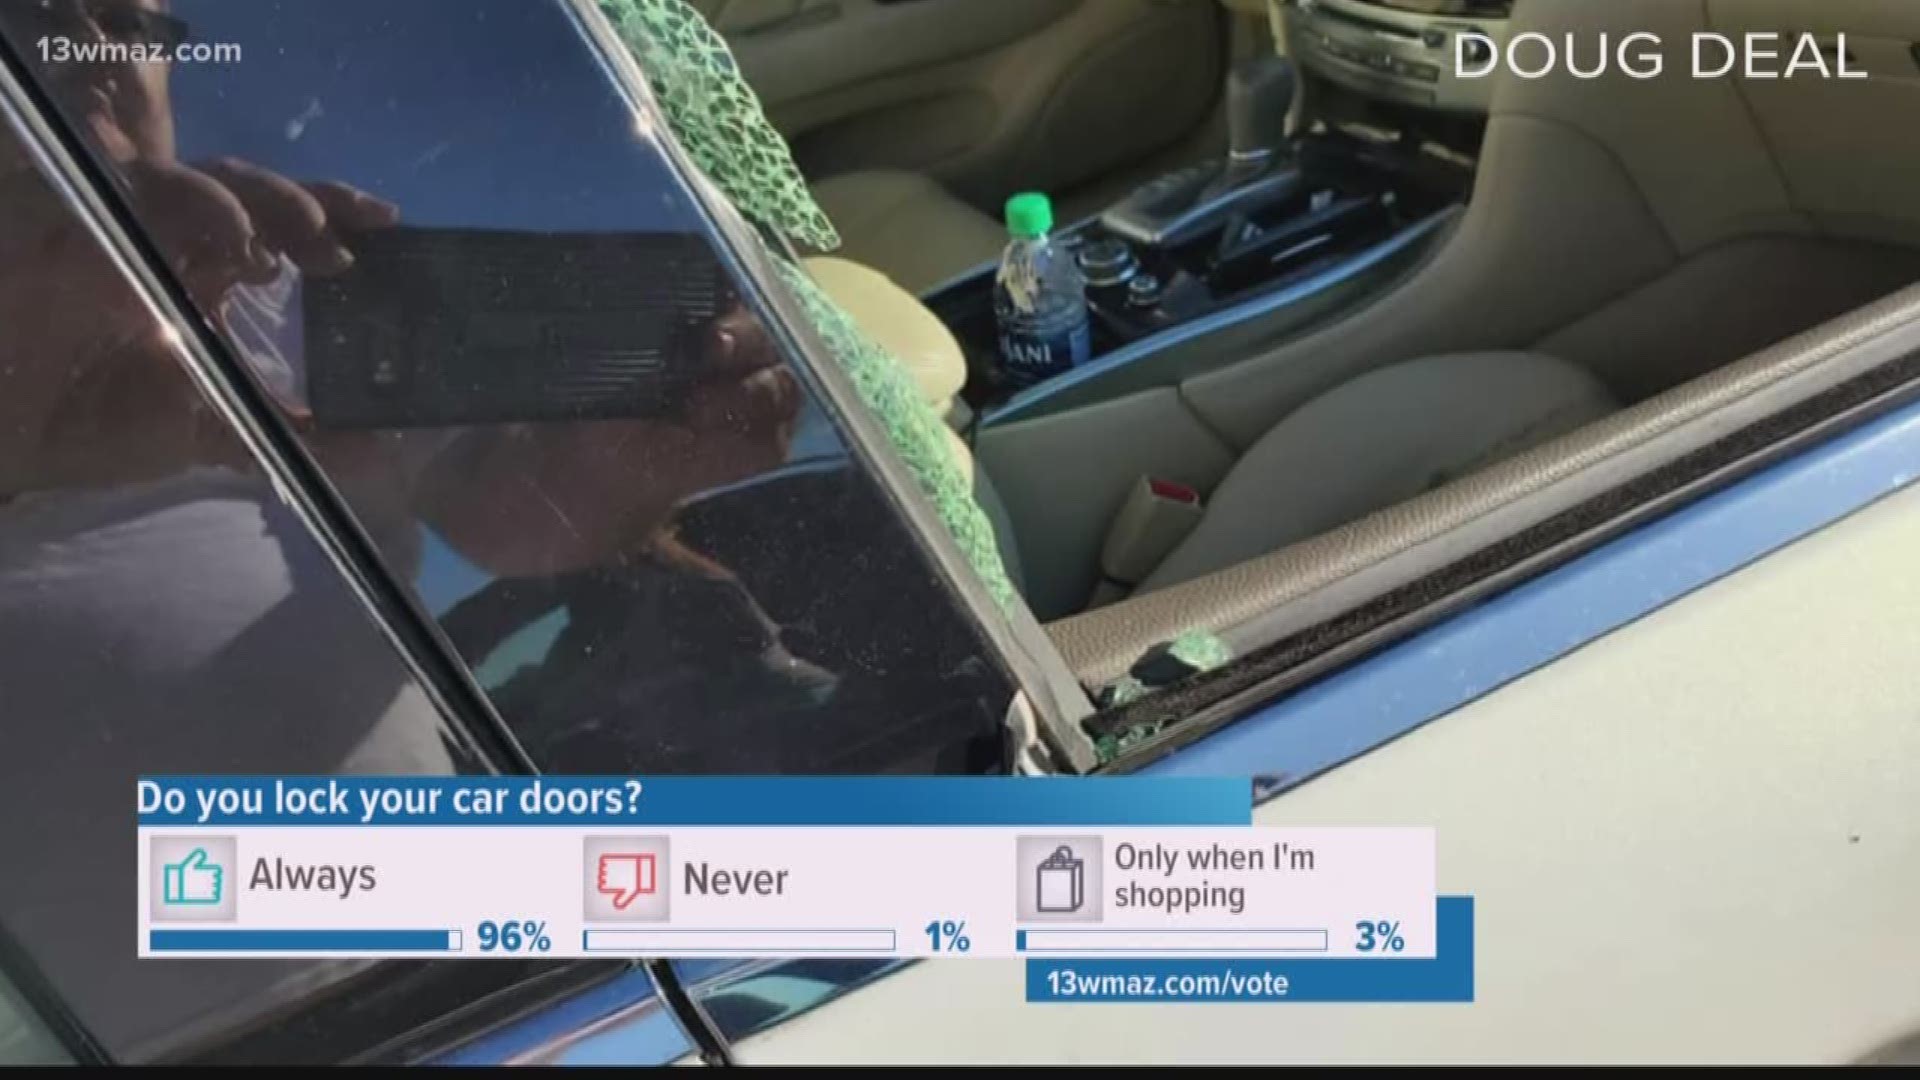 Central Georgia law enforcement says they see an uptick in car break ins around the Christmas holiday, so what are the best ways to prevent your car from being hit?